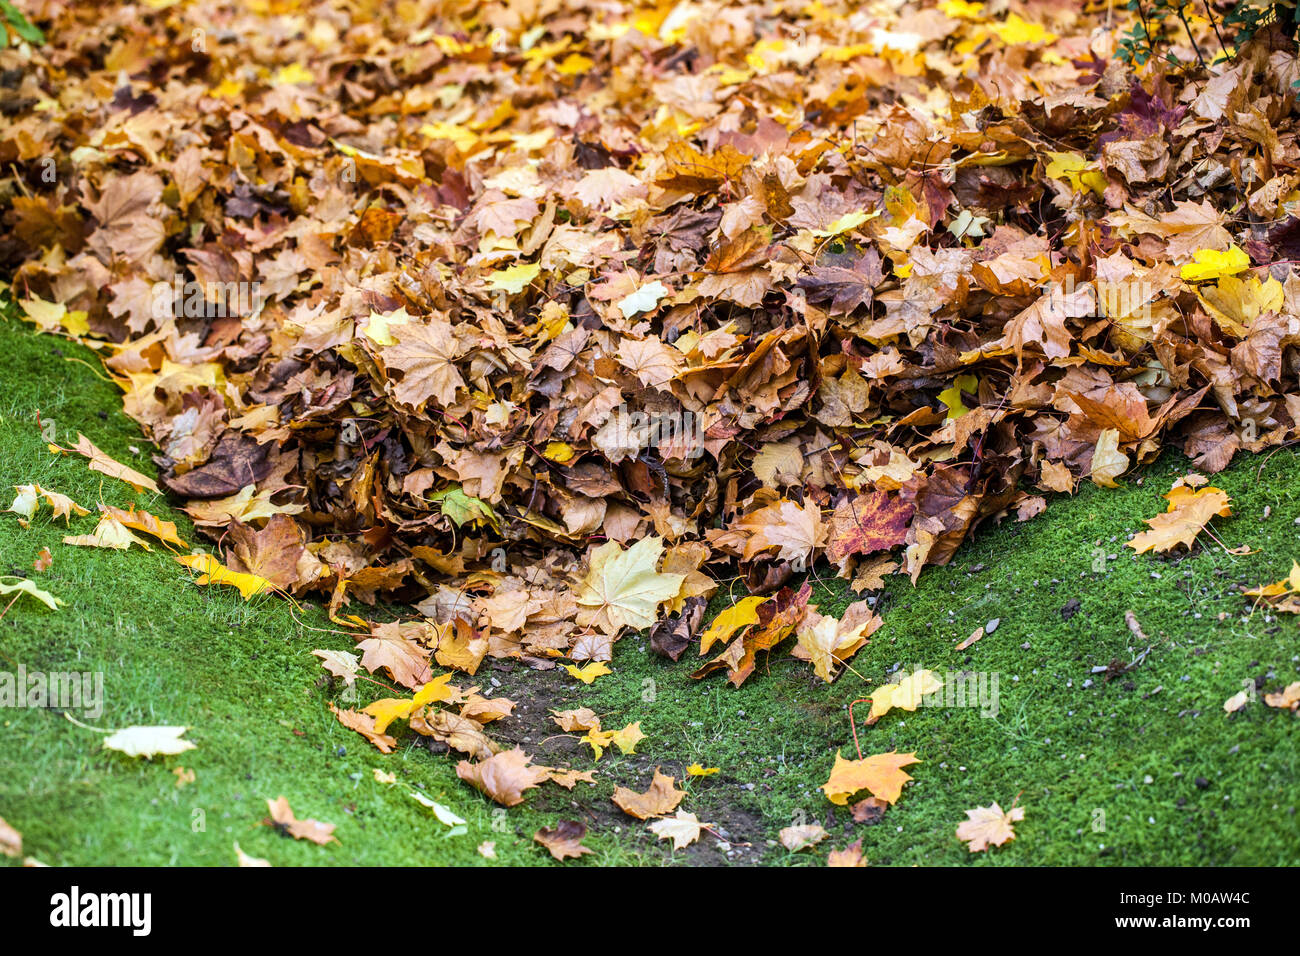 Pile of Leaves autumn in the garden Leaves on the ground, pile autumn leaves Stock Photo